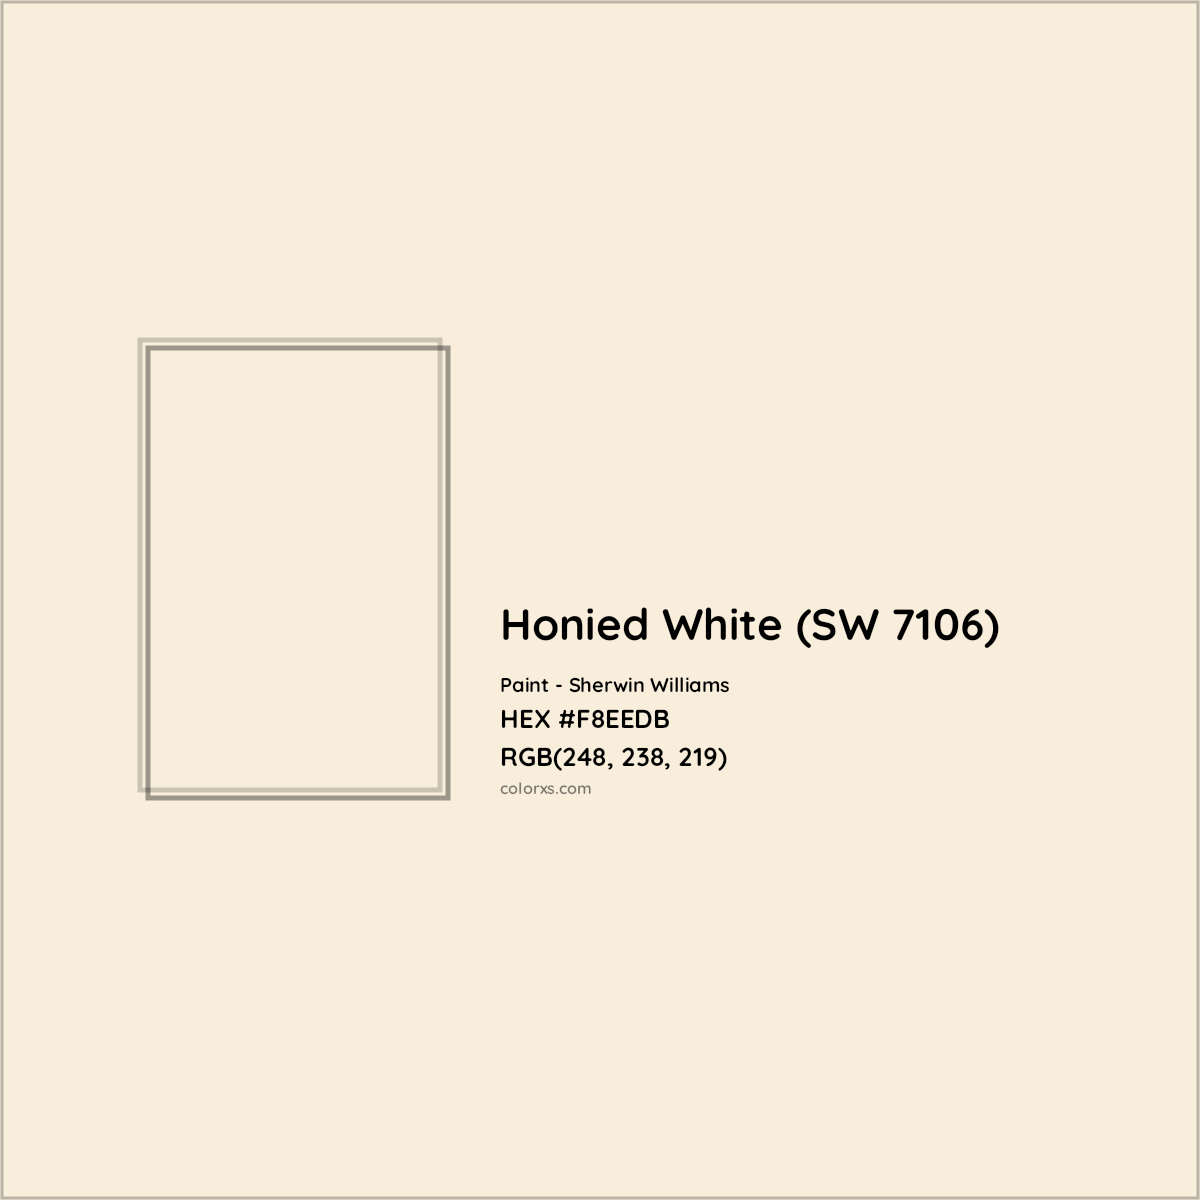 HEX #F8EEDB Honied White (SW 7106) Paint Sherwin Williams - Color Code